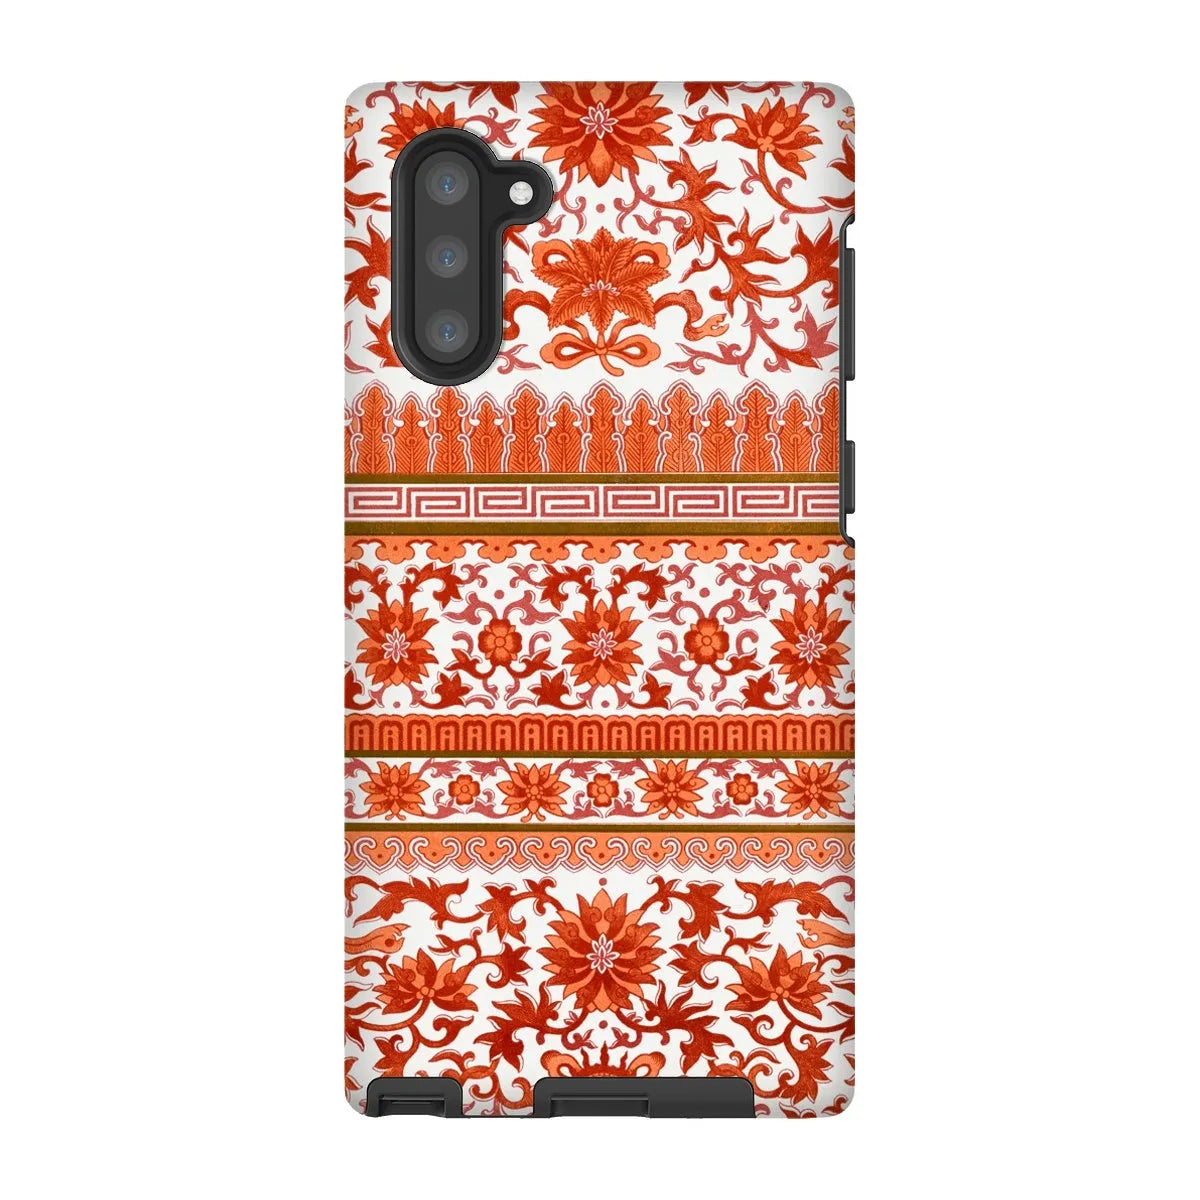 Fiery Chinese Floral Aesthetic Art Phone Case - Owen Jones - Samsung Galaxy Note 10 / Matte - Mobile Phone Cases